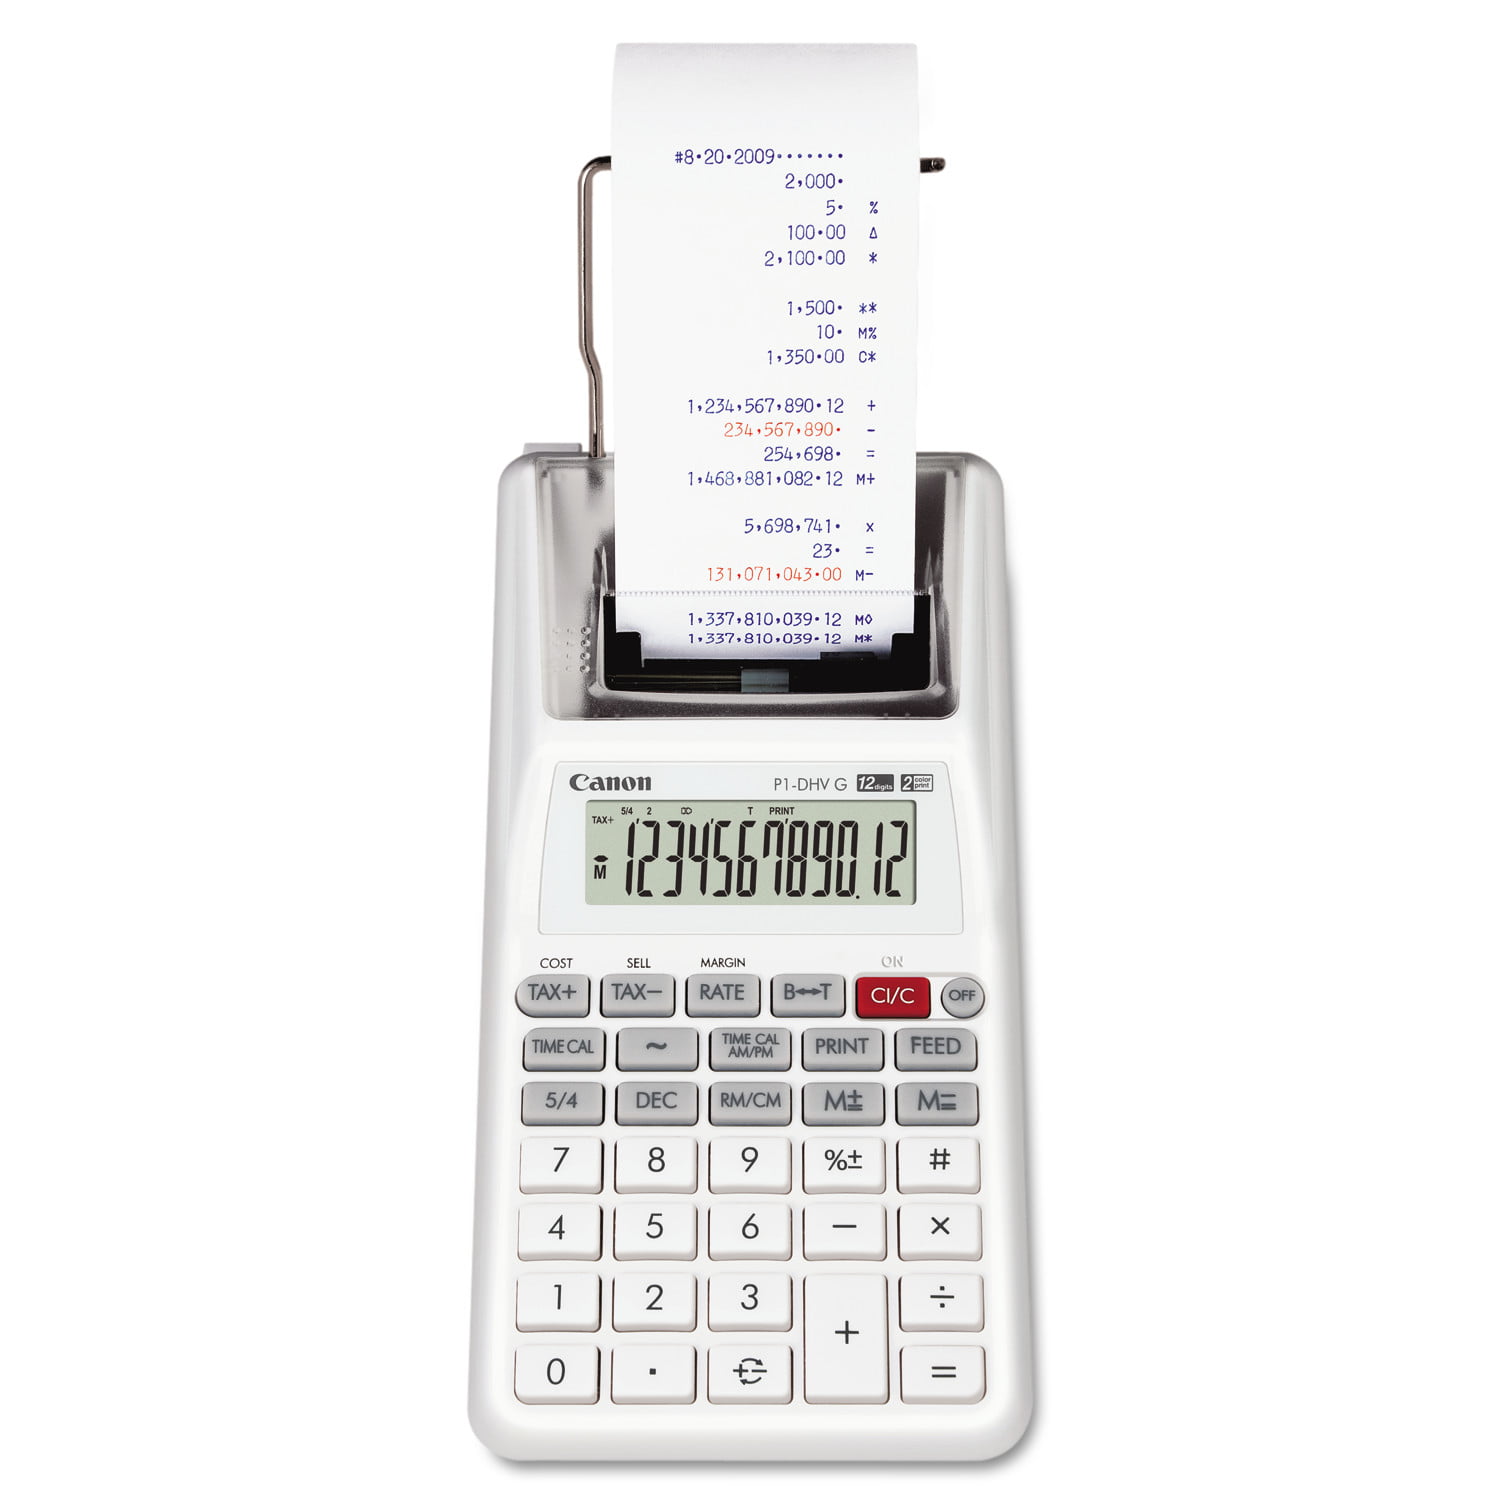 Canonamp;reg; P1-DHVG One-Color 12-Digit Printing Calculator Sold As 1 Each White Palm Printing Calculator Featuring a Stylish Silver Metallic Design. 